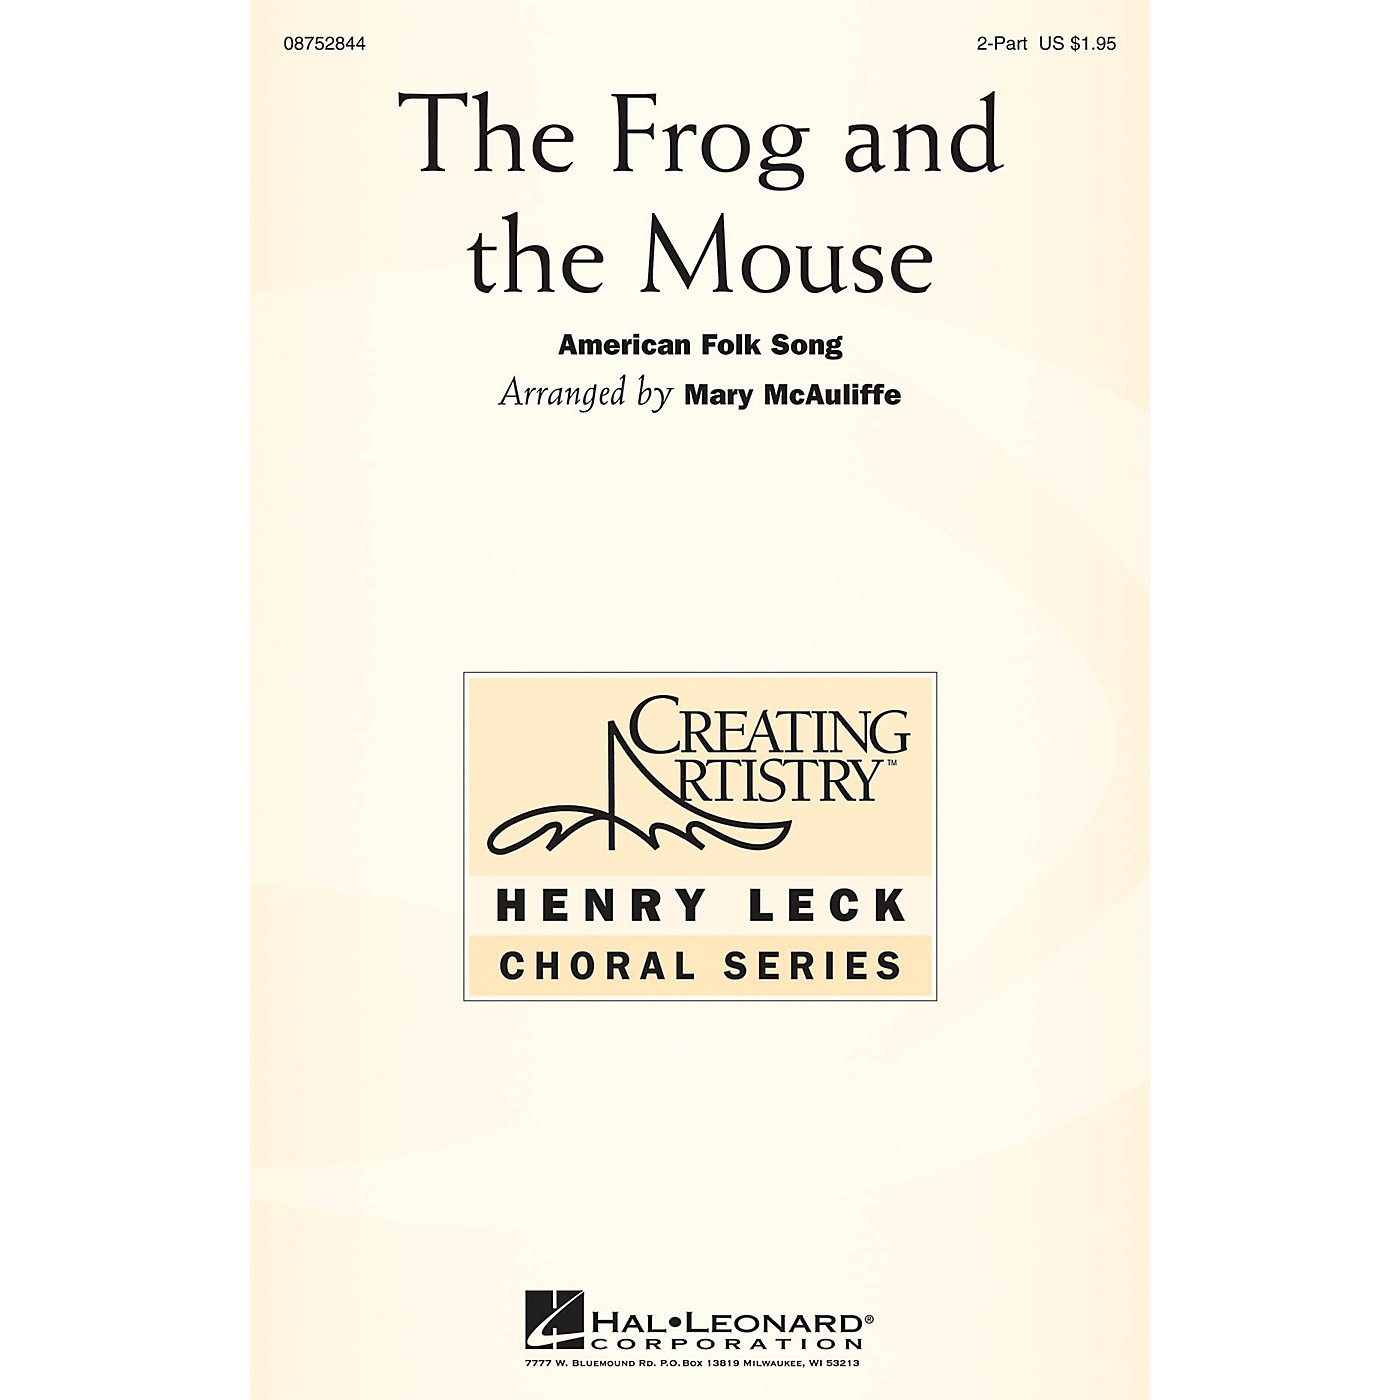 Hal Leonard The Frog and the Mouse 2-Part arranged by Mary McAuliffe thumbnail